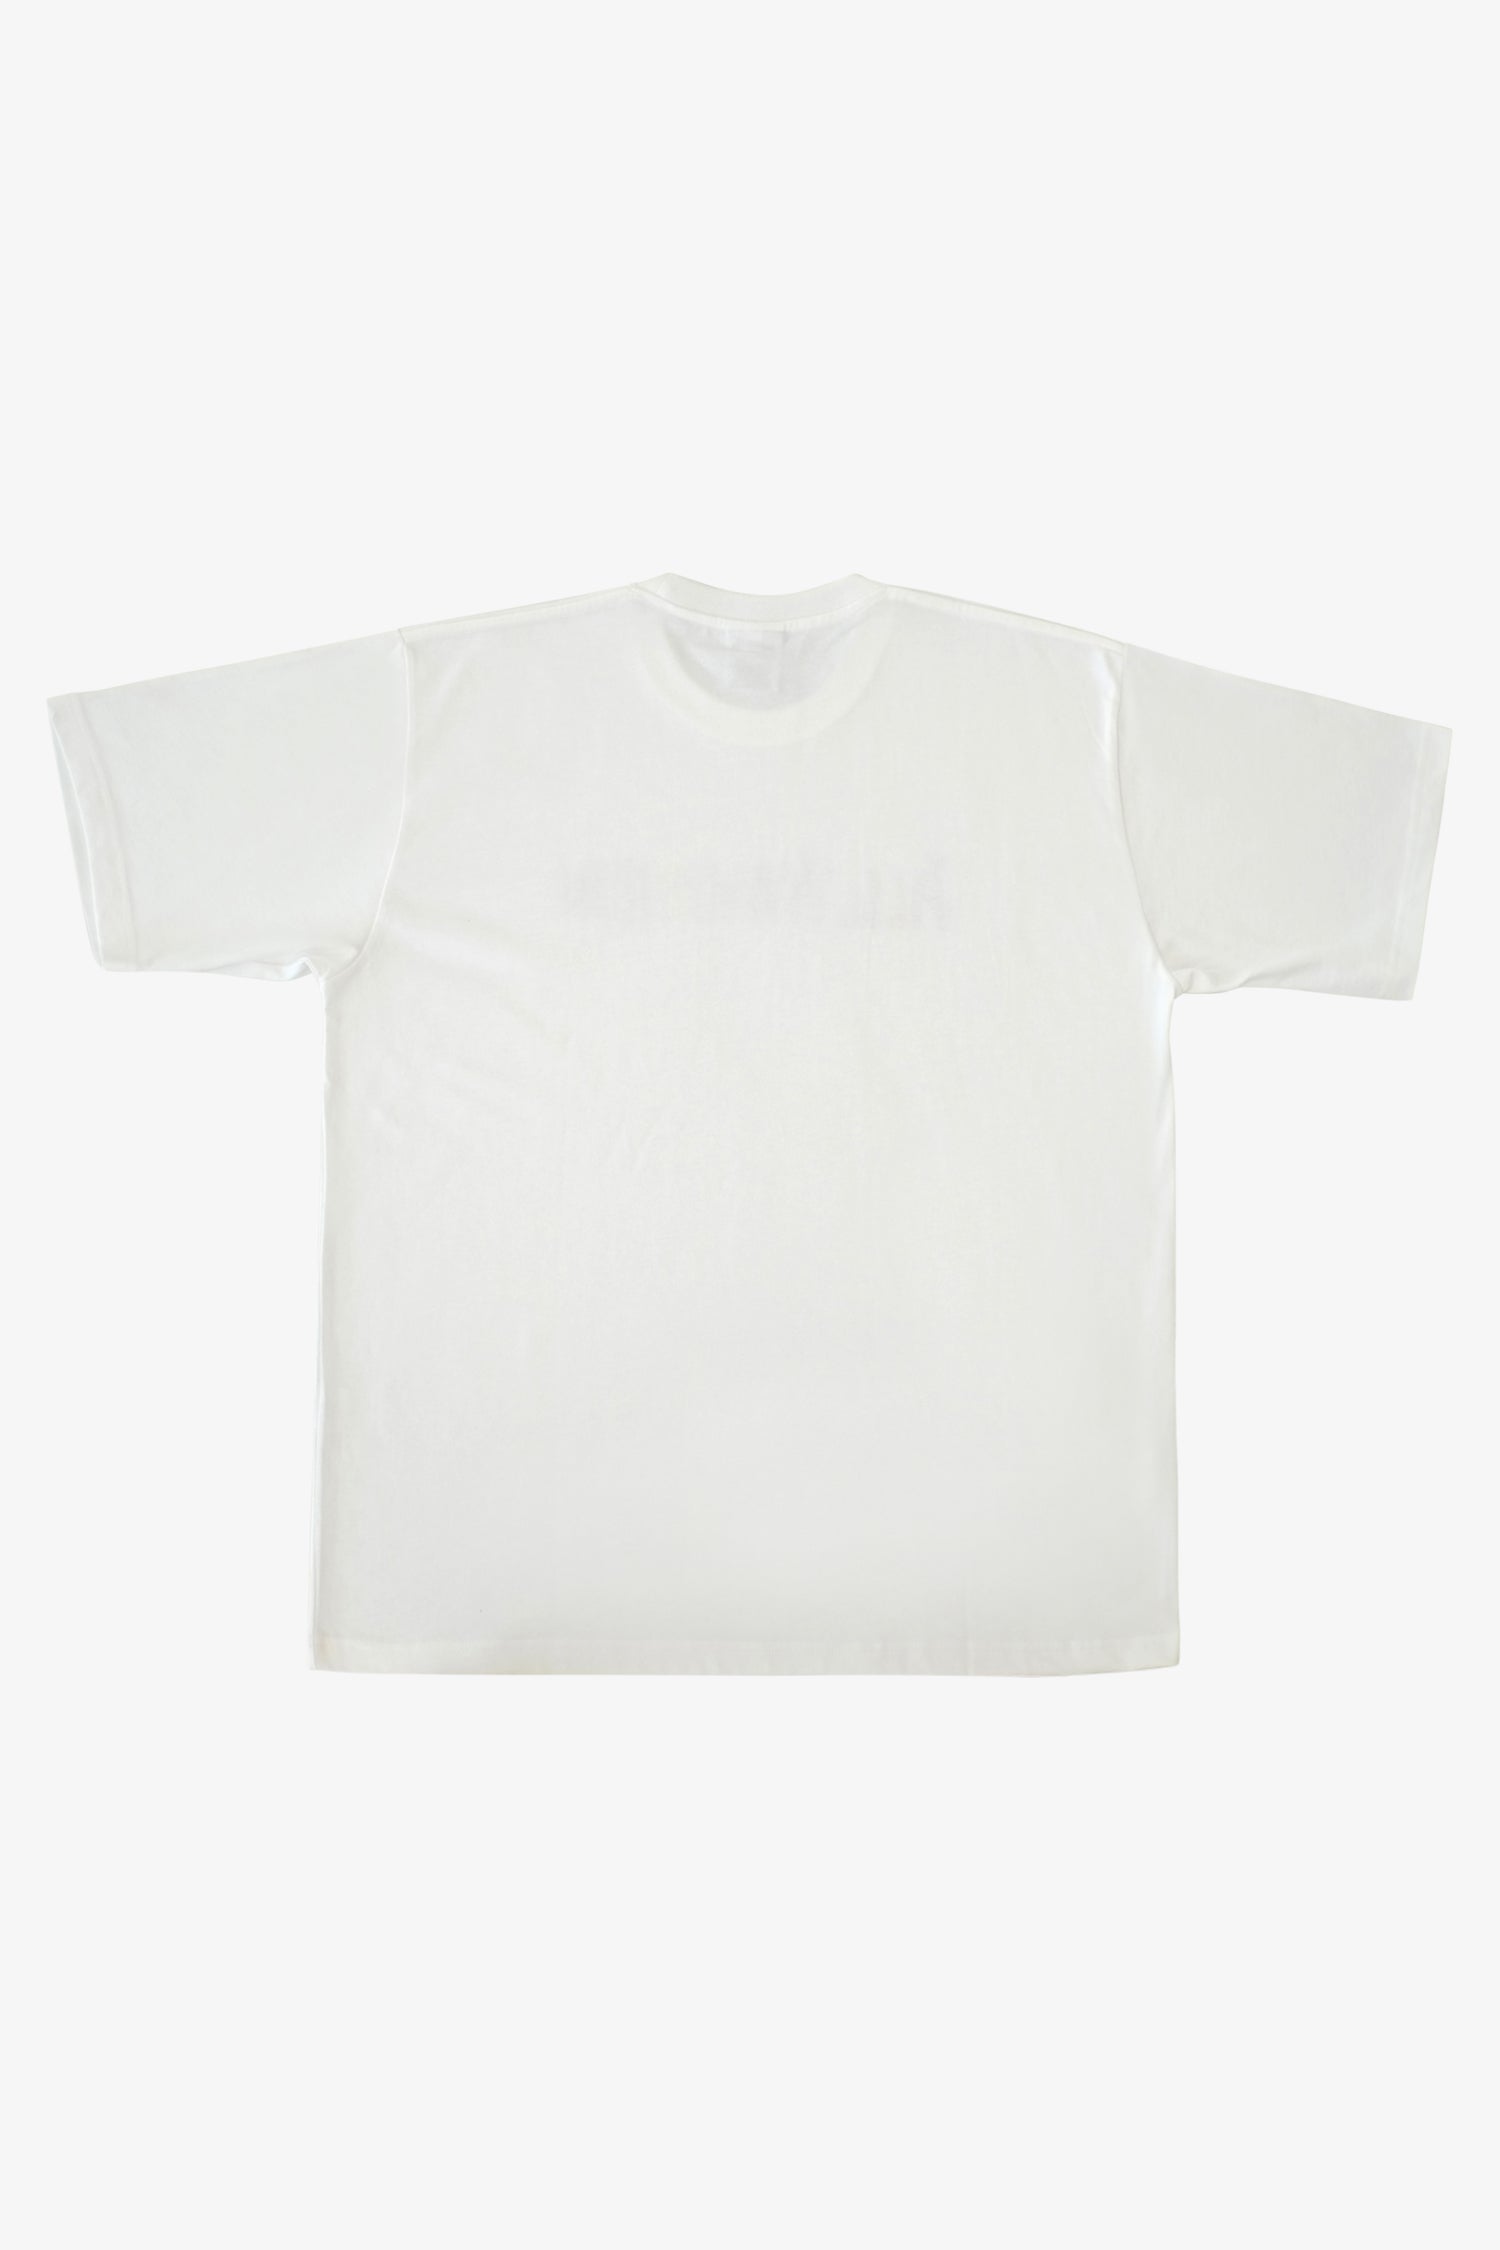 All Welcome Playground Tee- Selectshop FRAME